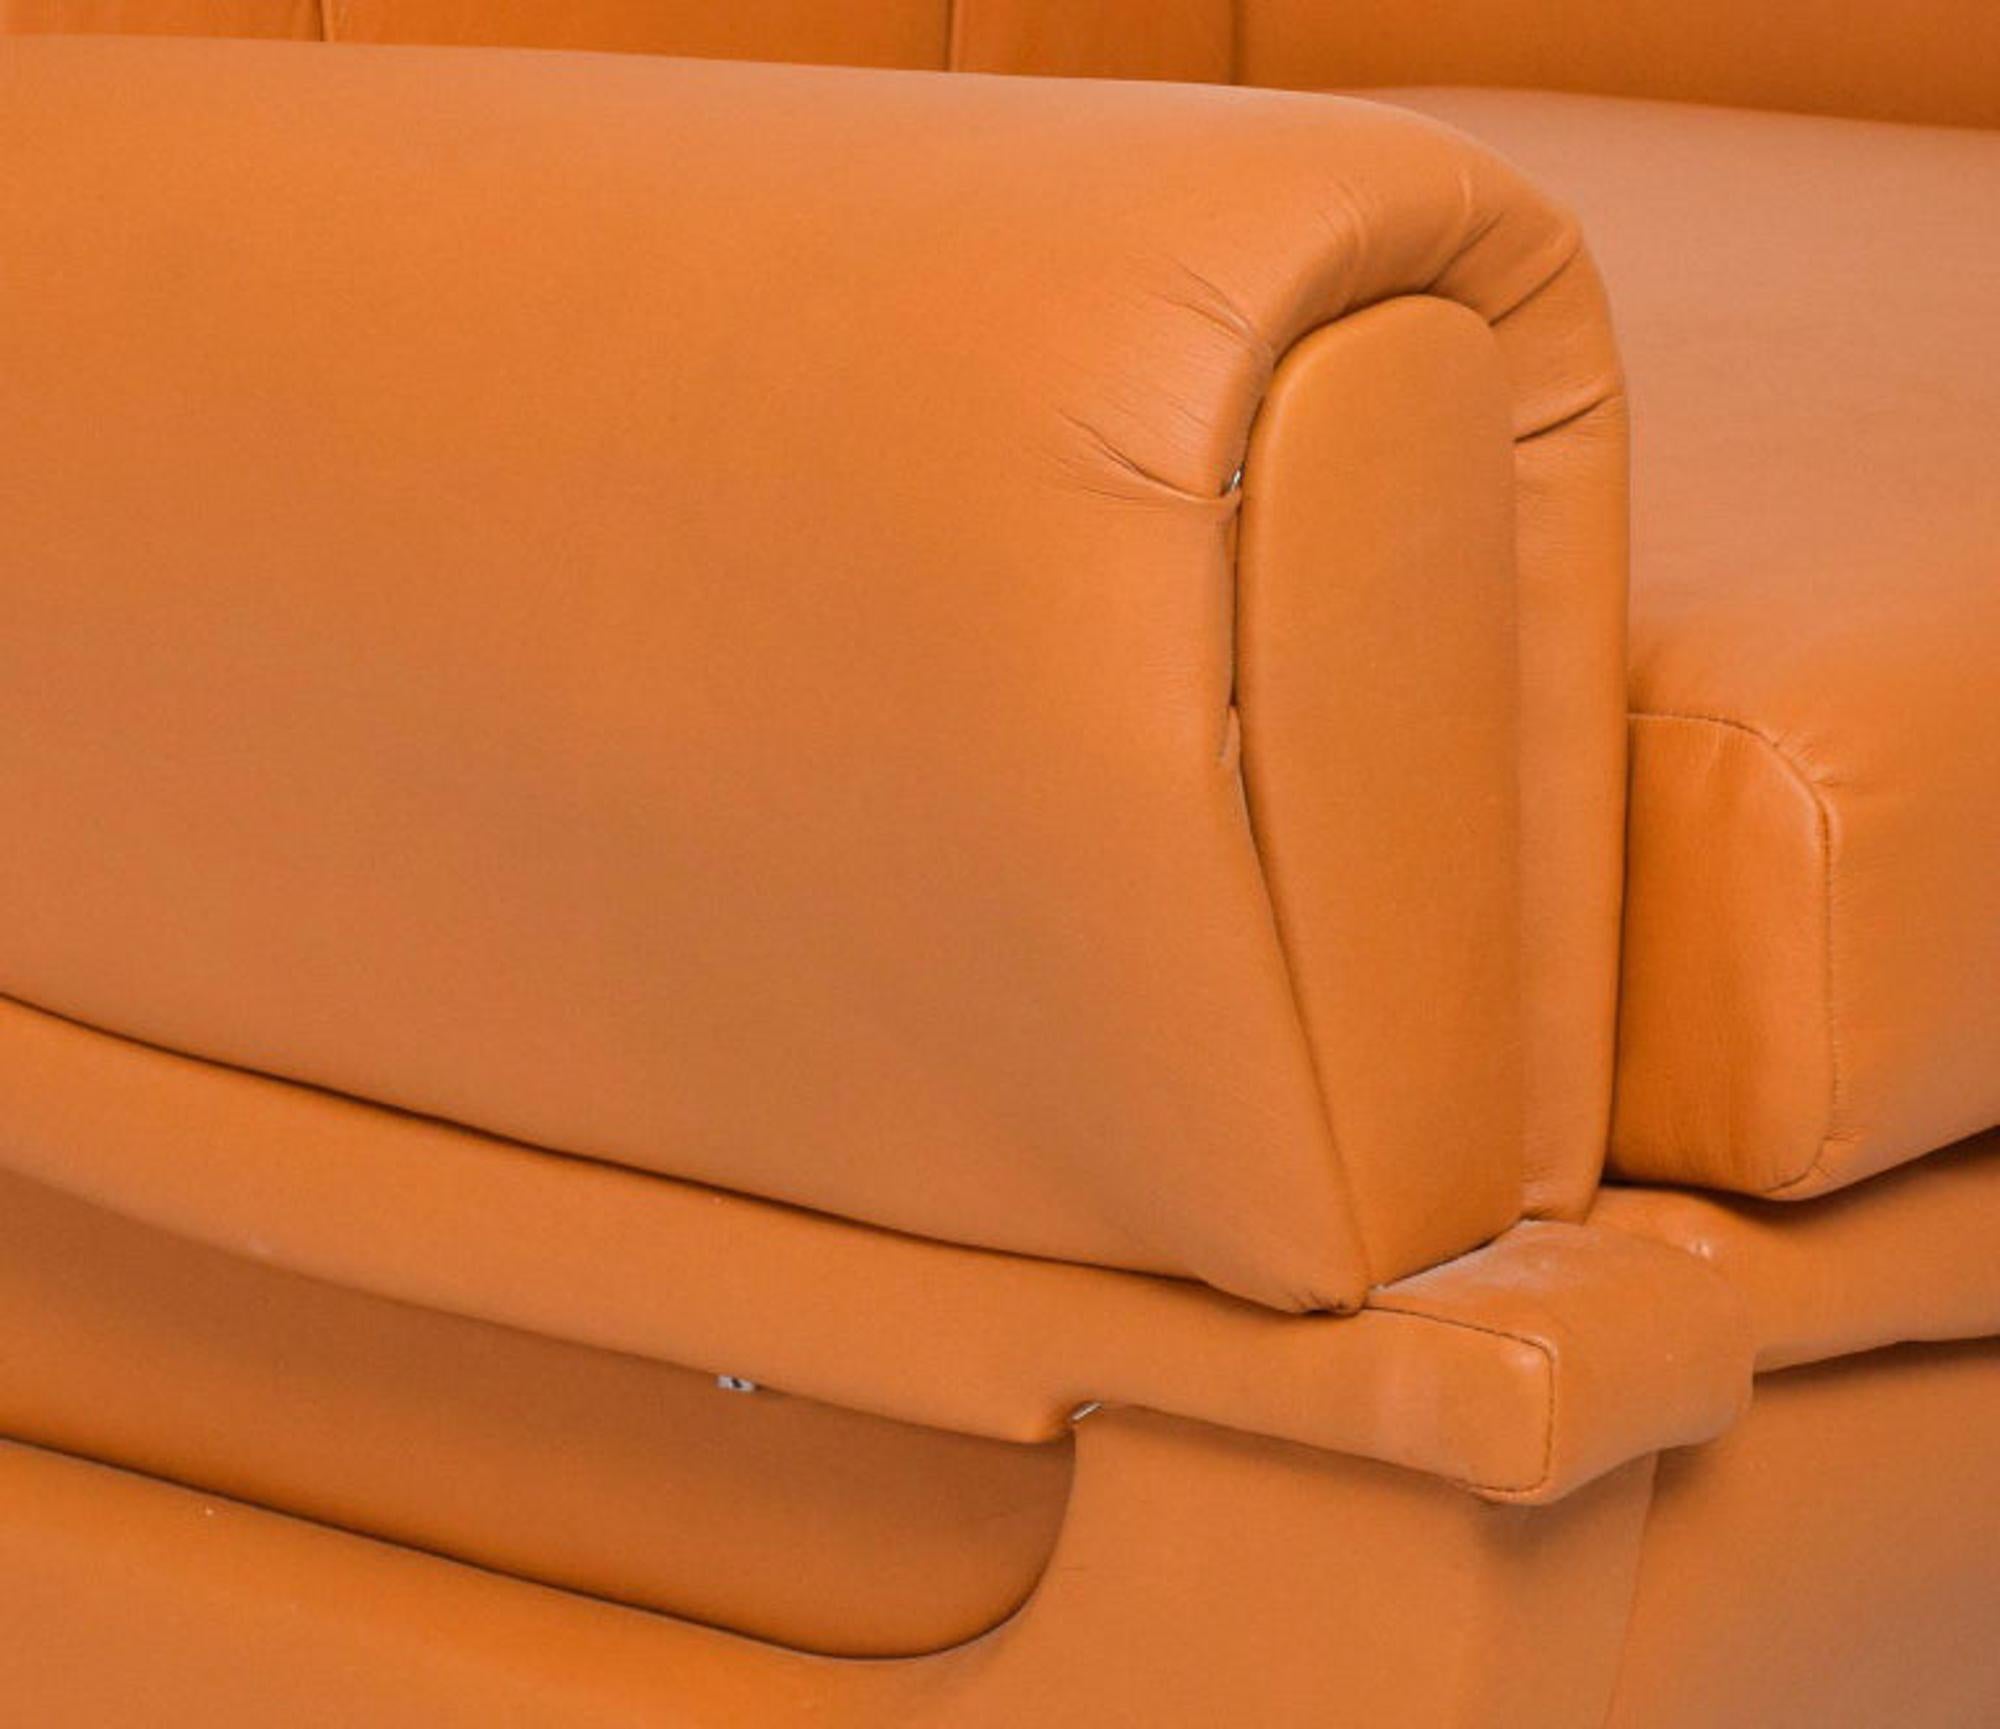 Butterscotch Leather Art Deco Lounge Armchairs set of 2. 
Designed by Giuseppe Munari of Italy
Chairs are unmarked.
Inspiration Jean Michel Frank of France.
33 H X 39 D x 34 W inches
Seat: 16.5 tall, armrest 20.5
Chairs acquired in northern Italy.